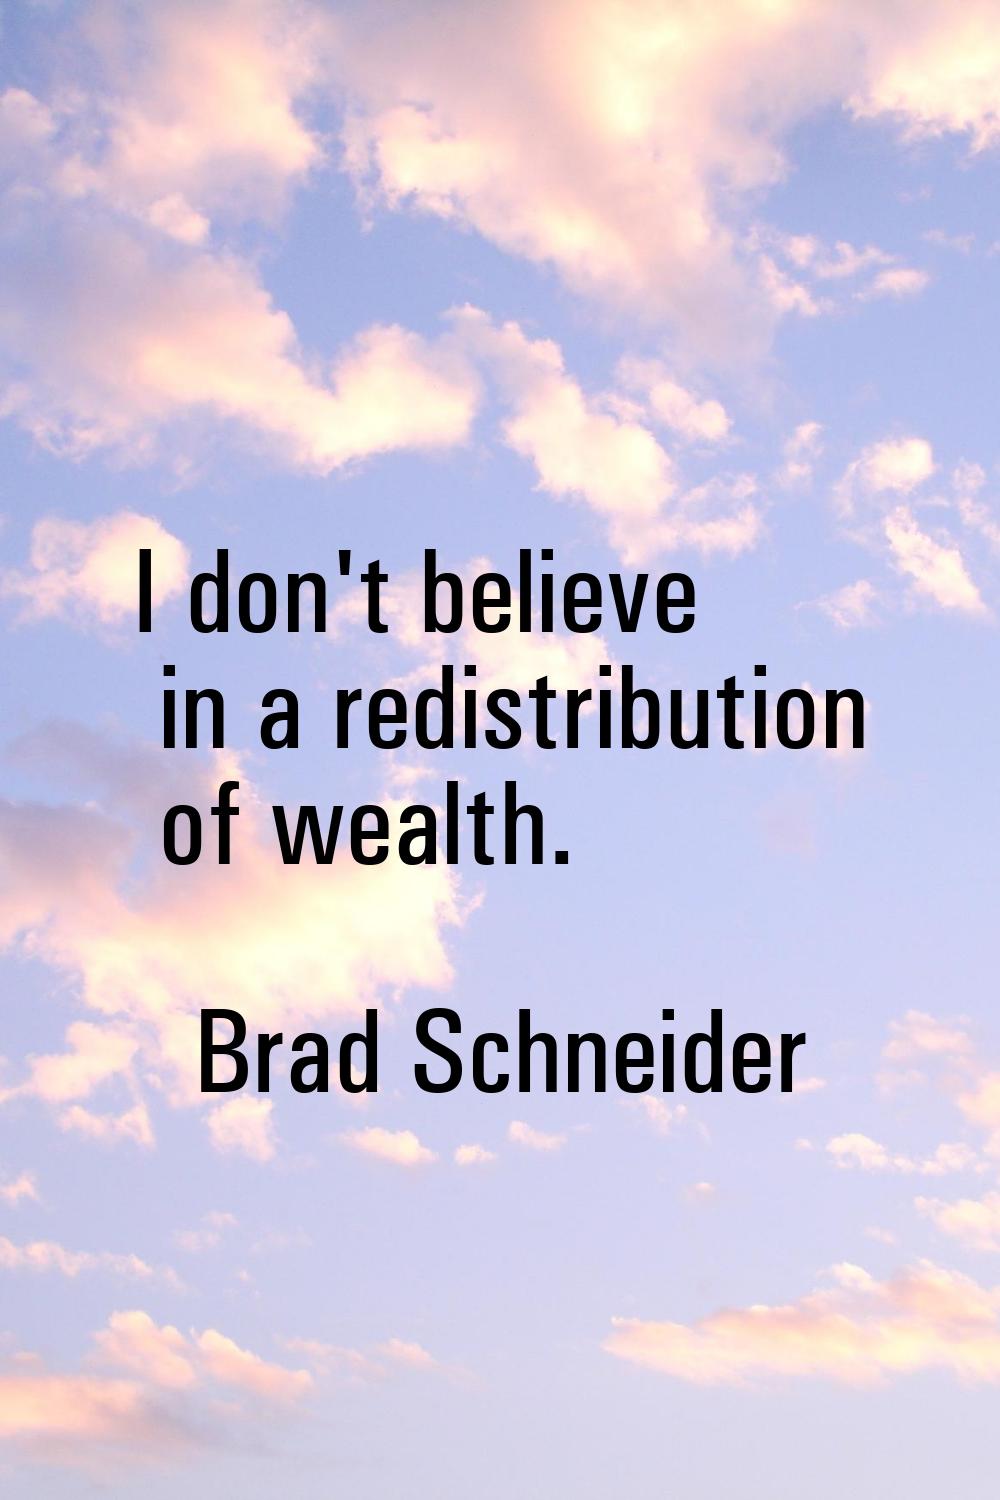 I don't believe in a redistribution of wealth.